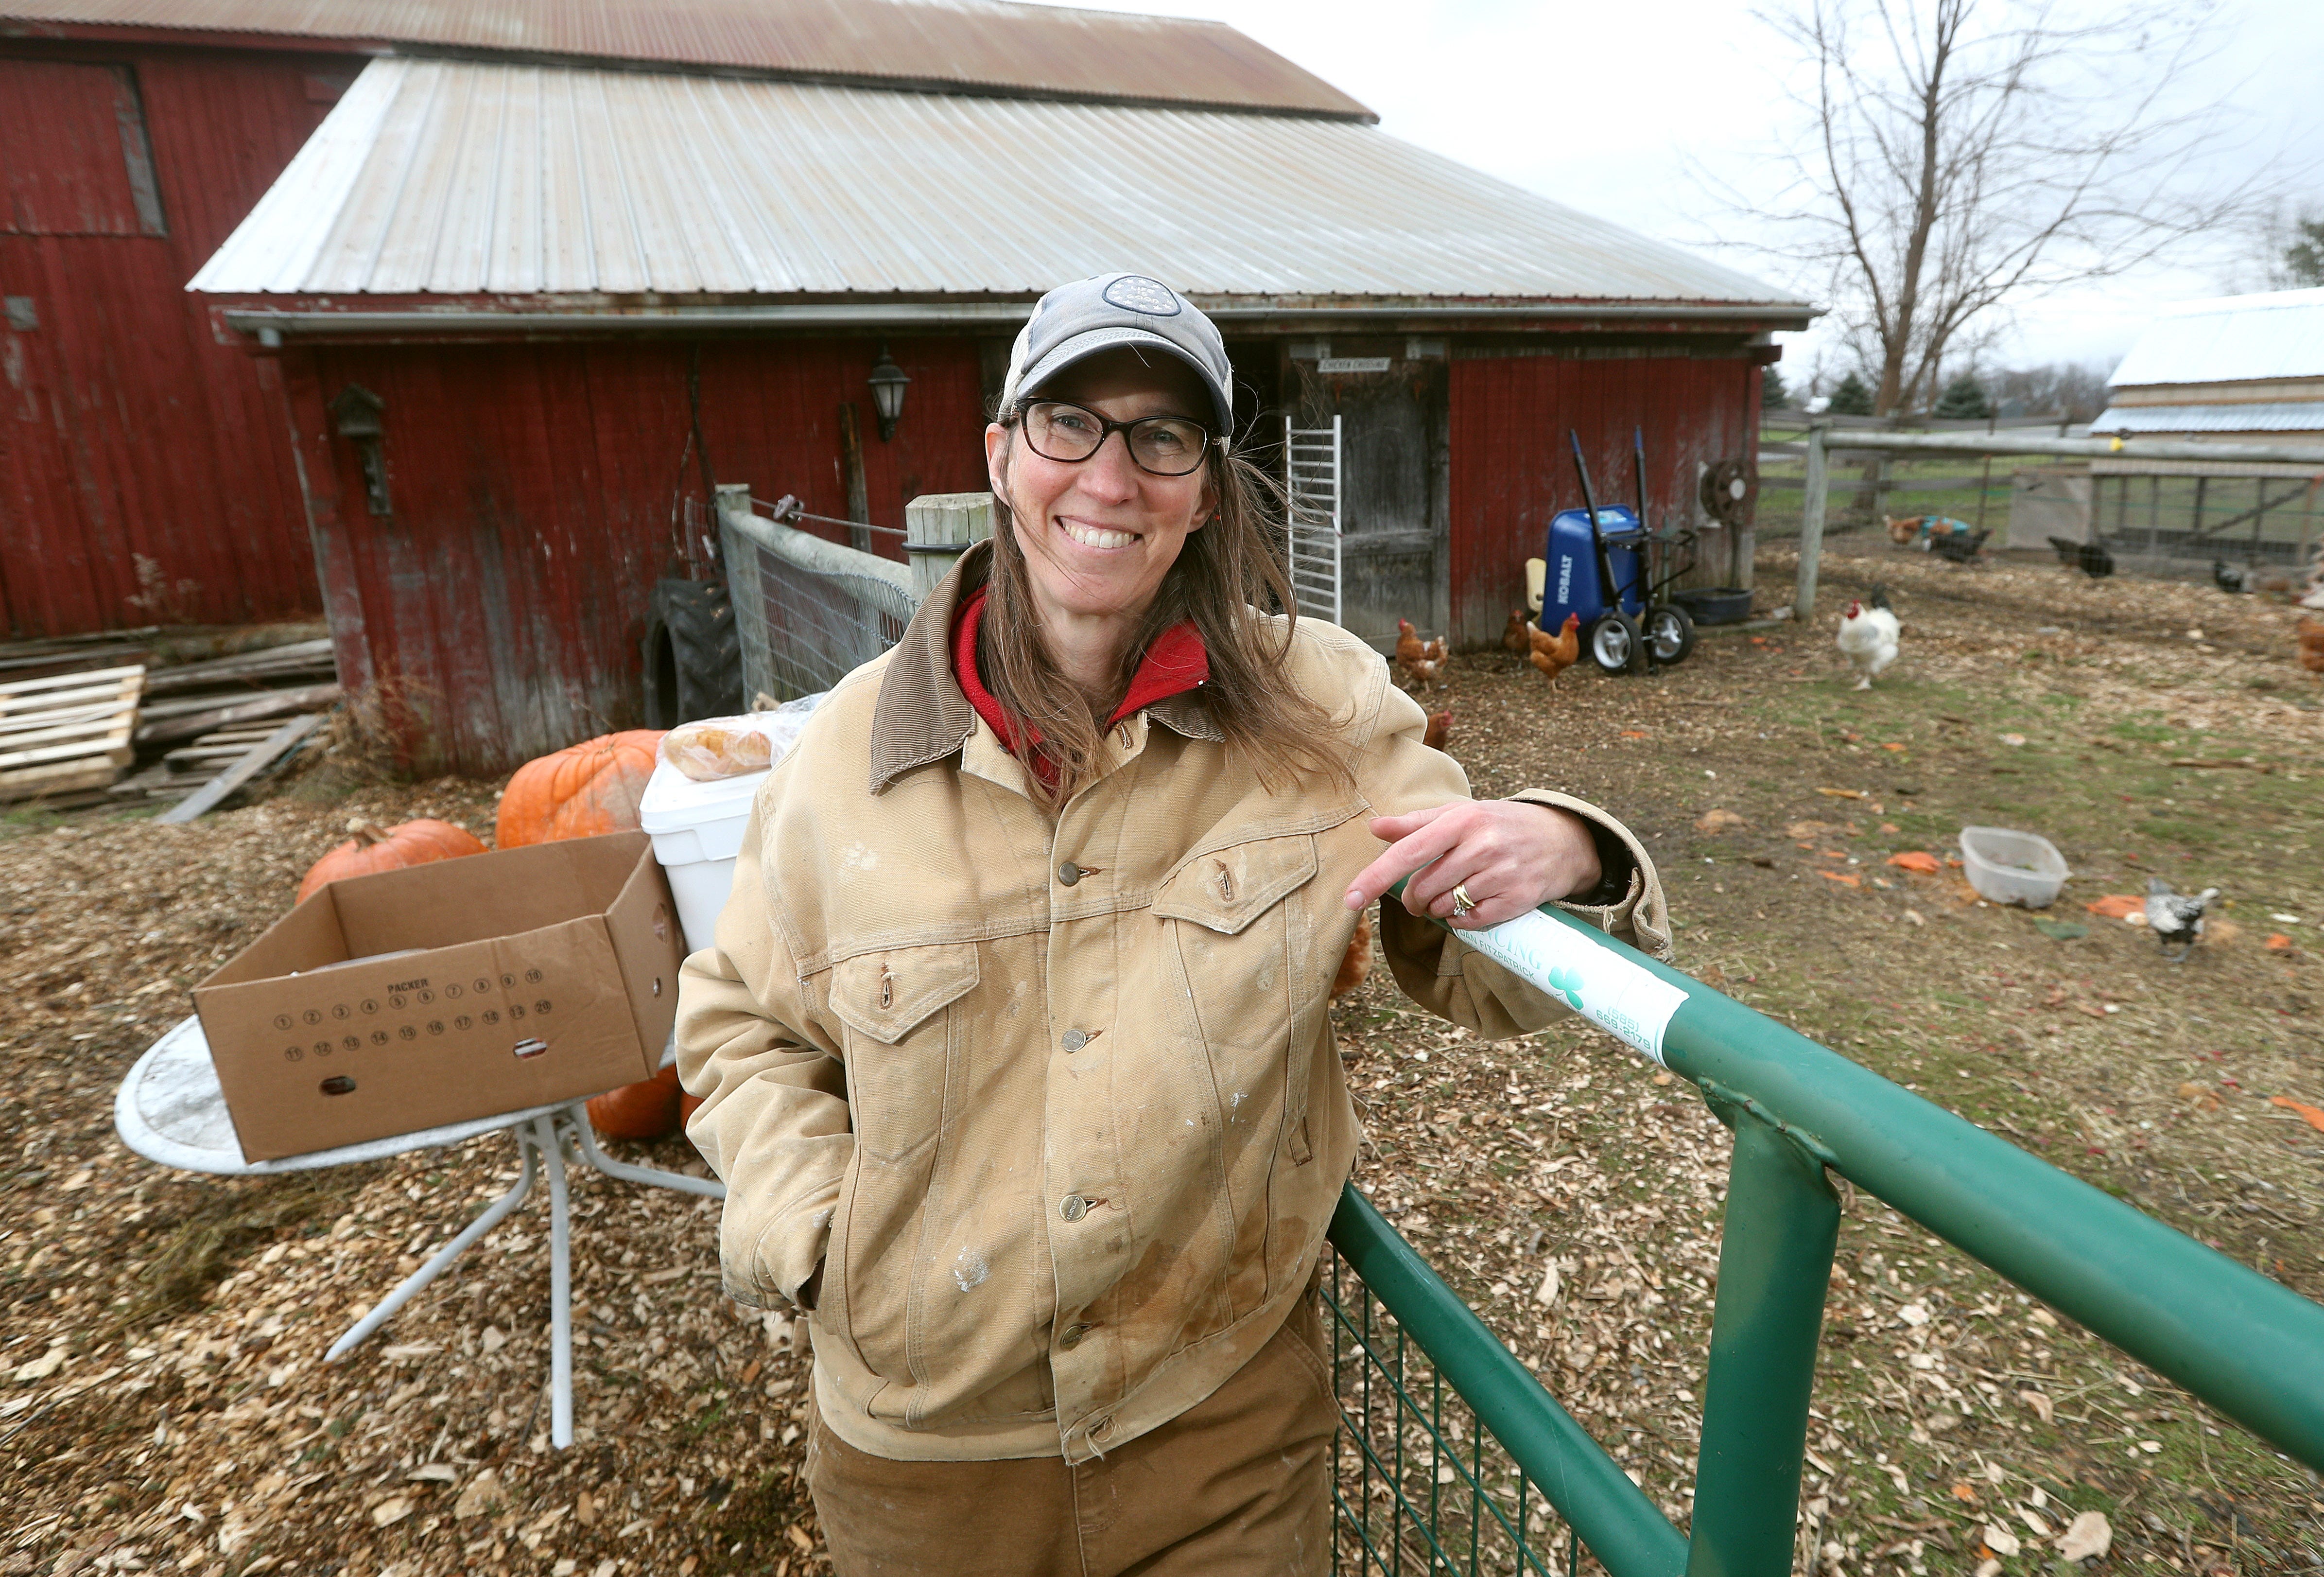 Belinda Cole says the produce donated by several grocery stores has really helped on their Livonia farm run by she and her husband Matt and their three children.